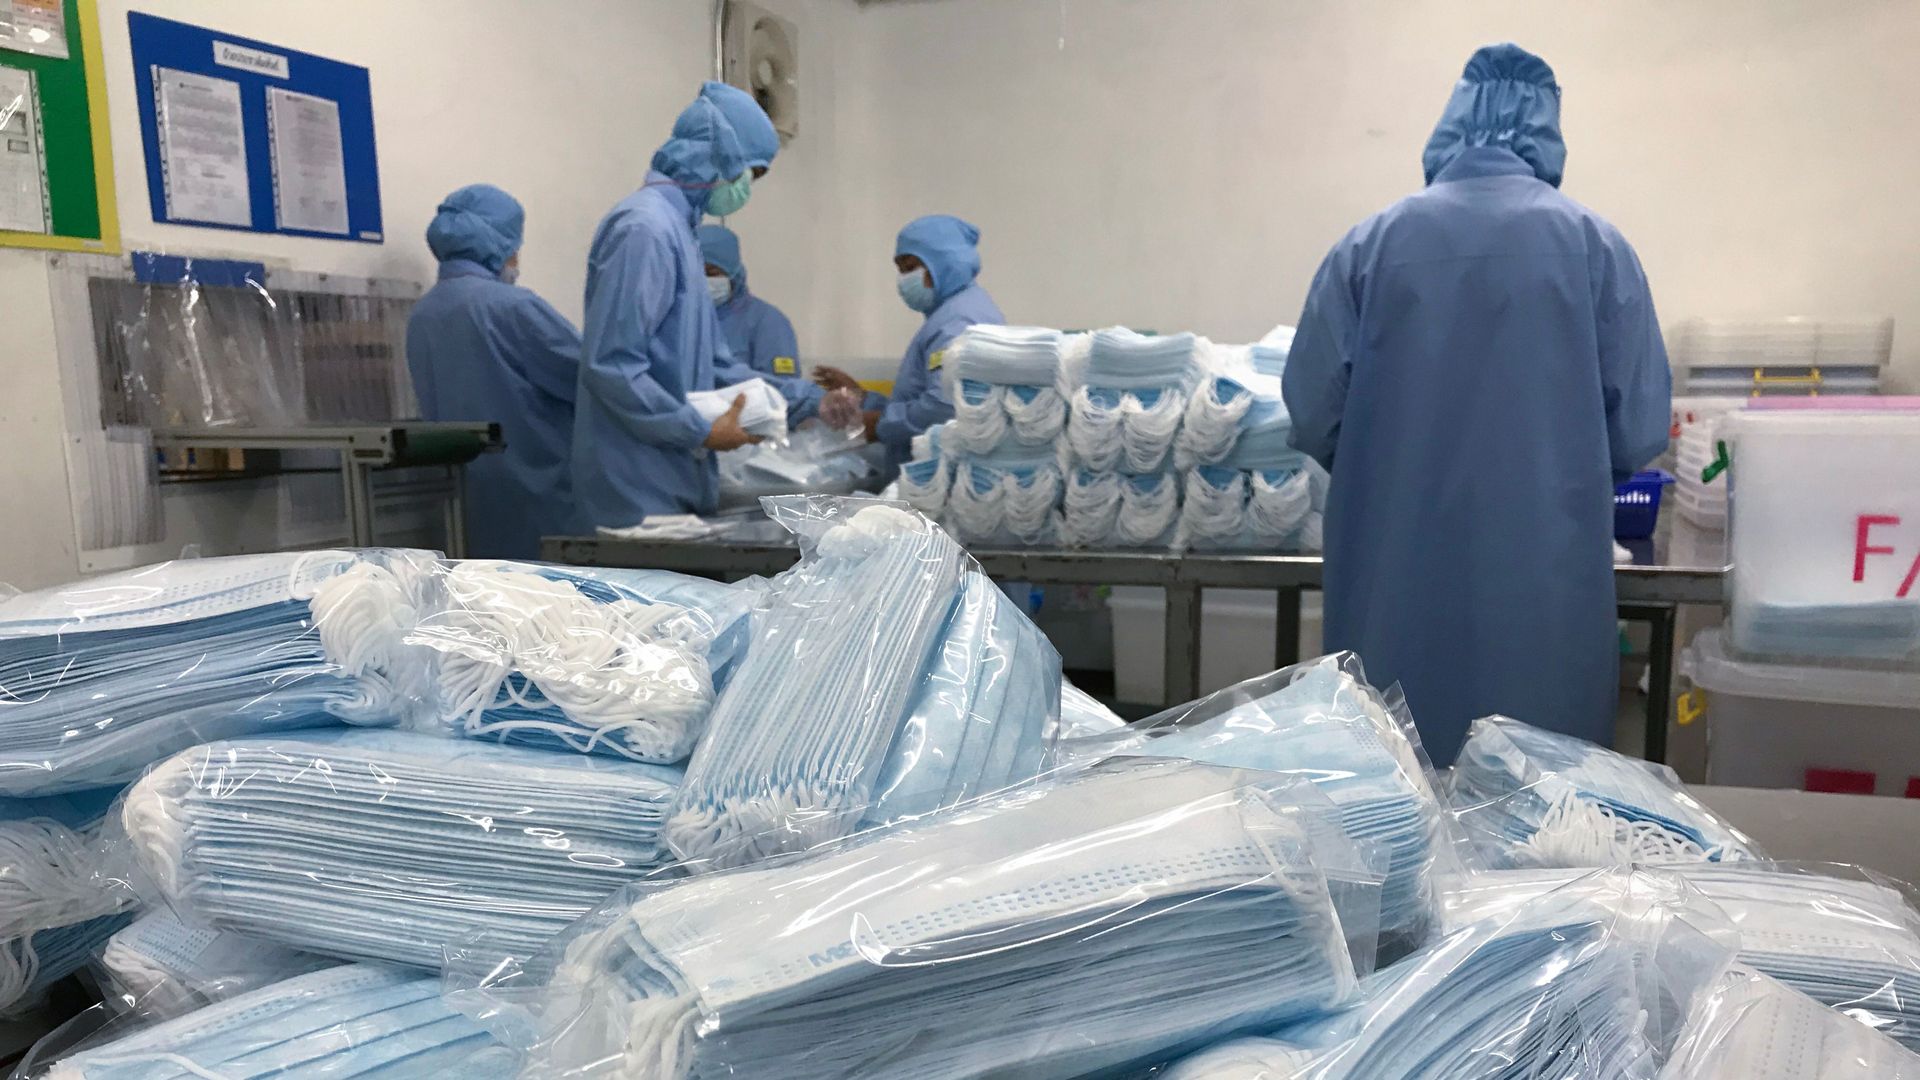 A Thai surgical mask factory, producing 10 million masks a month, increased working hours to cope with the rising demand following an outbreak of SARS-like virus in China,